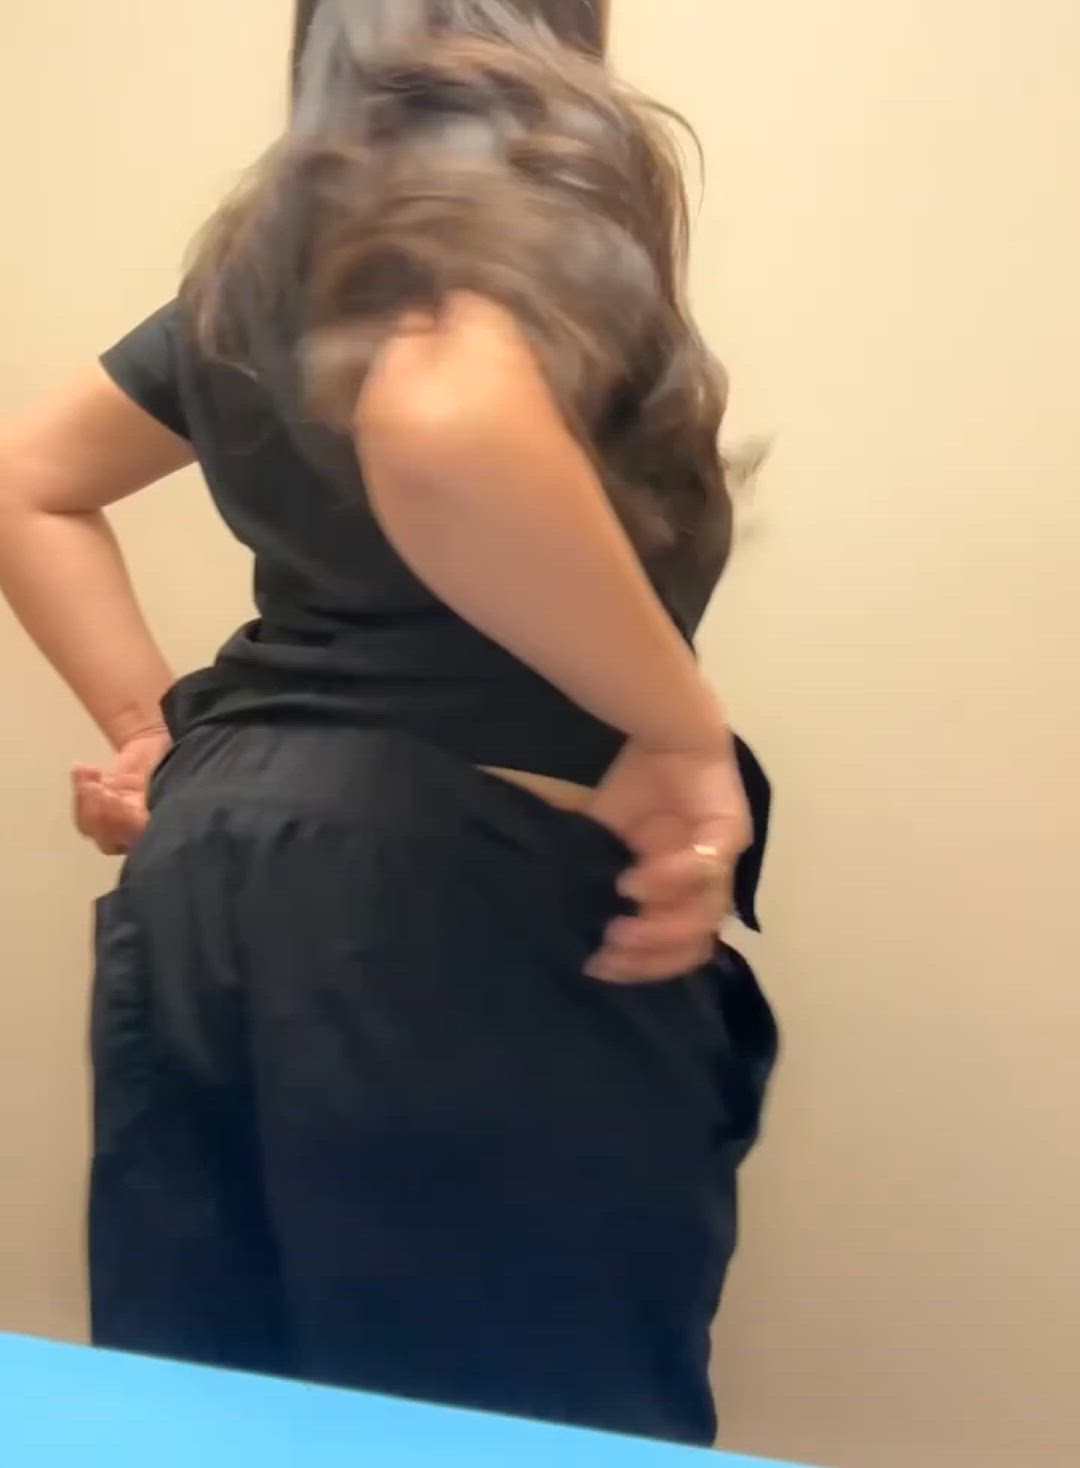 Ass porn video with onlyfans model ashleyyybabyxoxox <strong>@ashleyyybabyxoxox</strong>